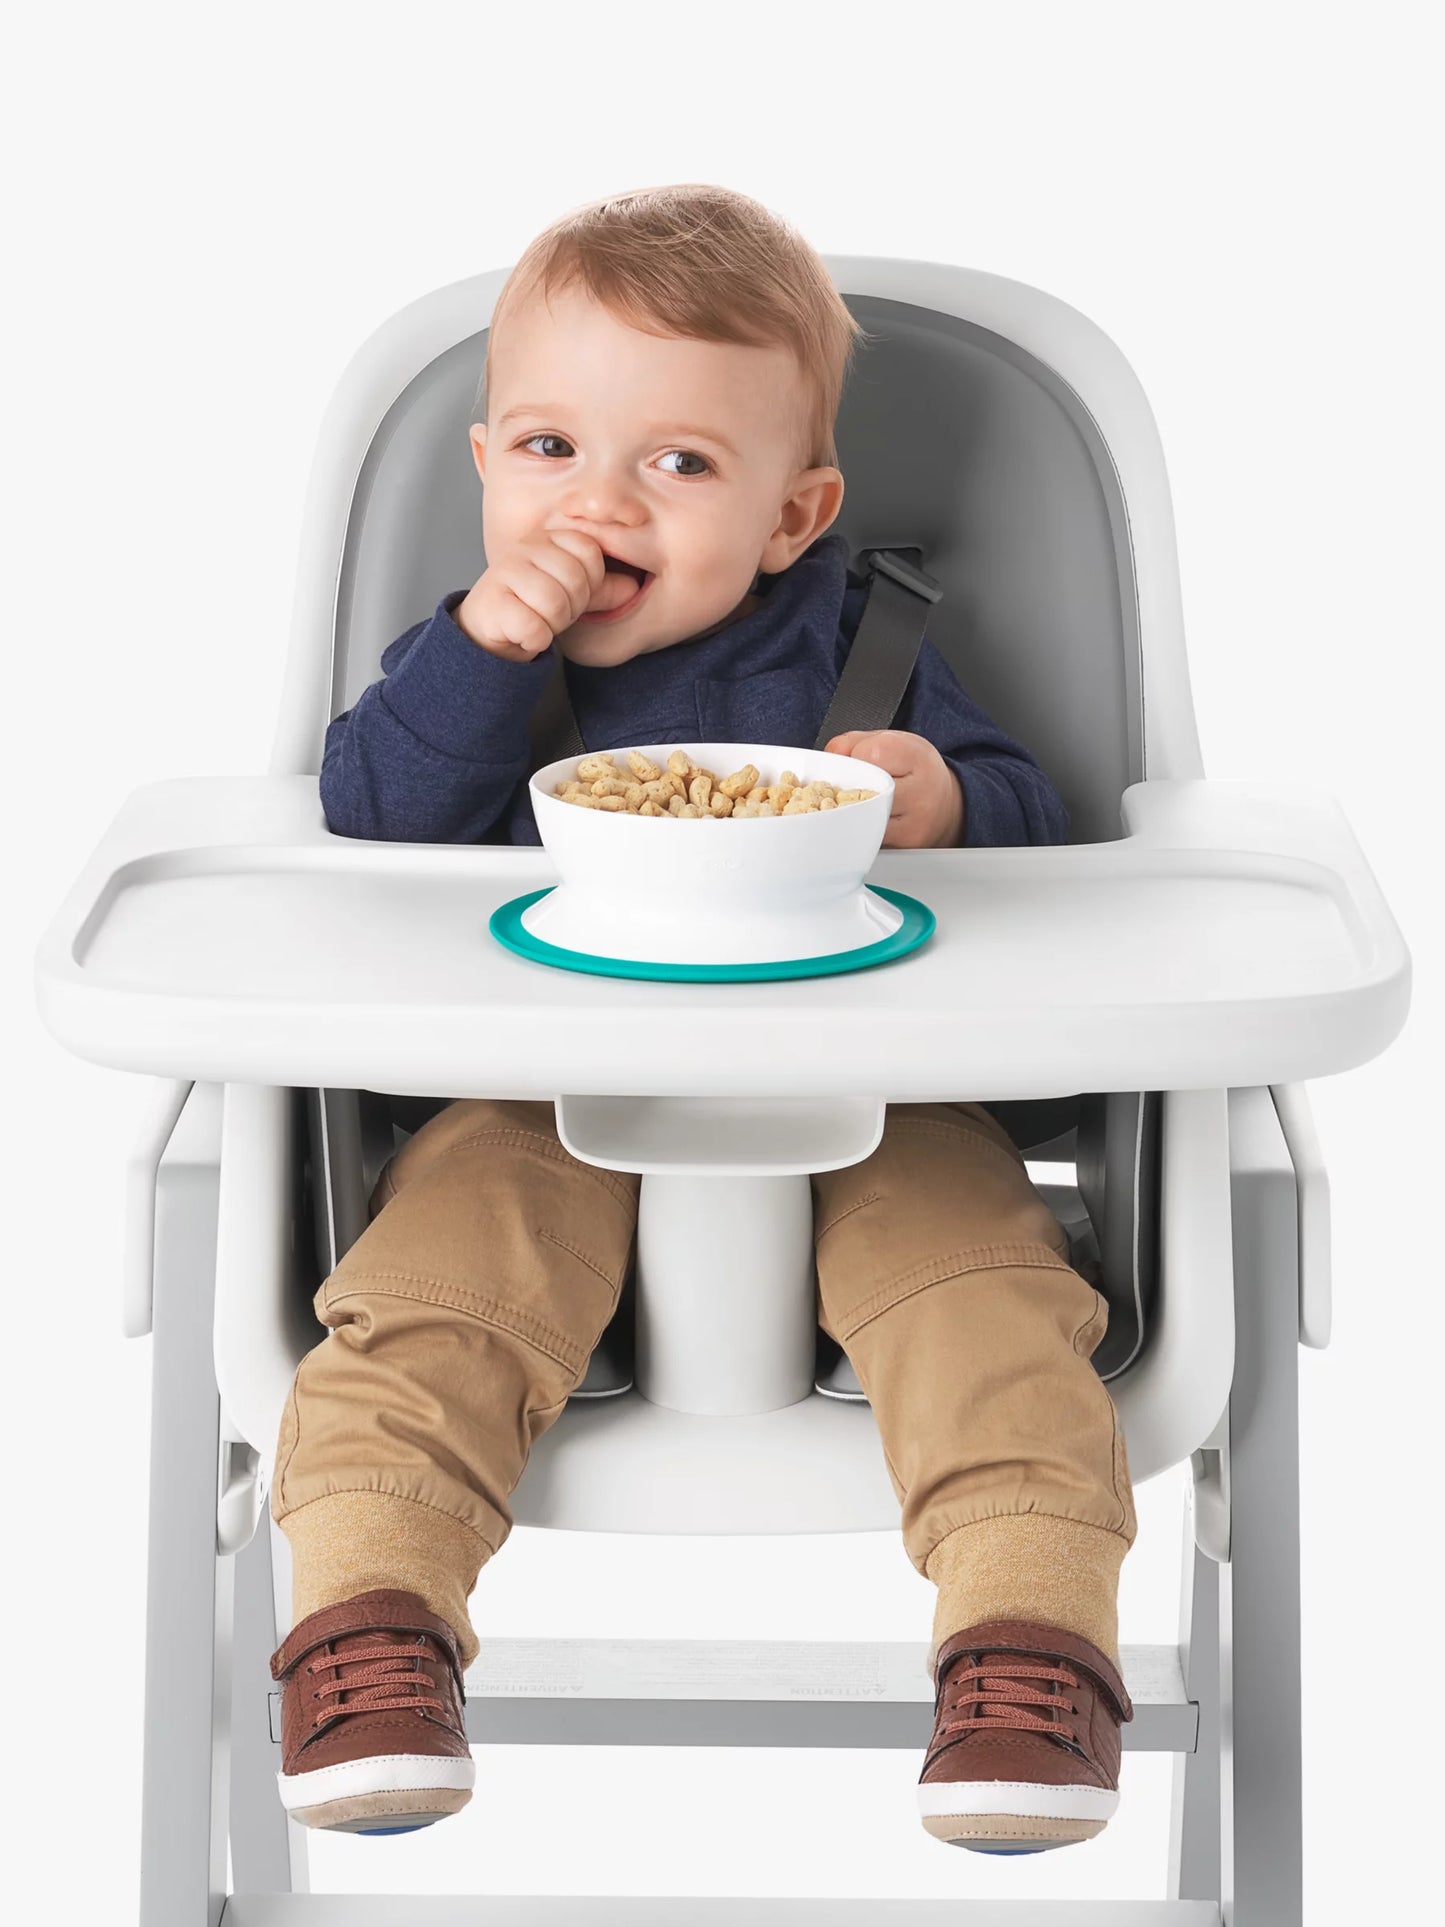 Oxo Tot Stick & Stay Suction Bowl